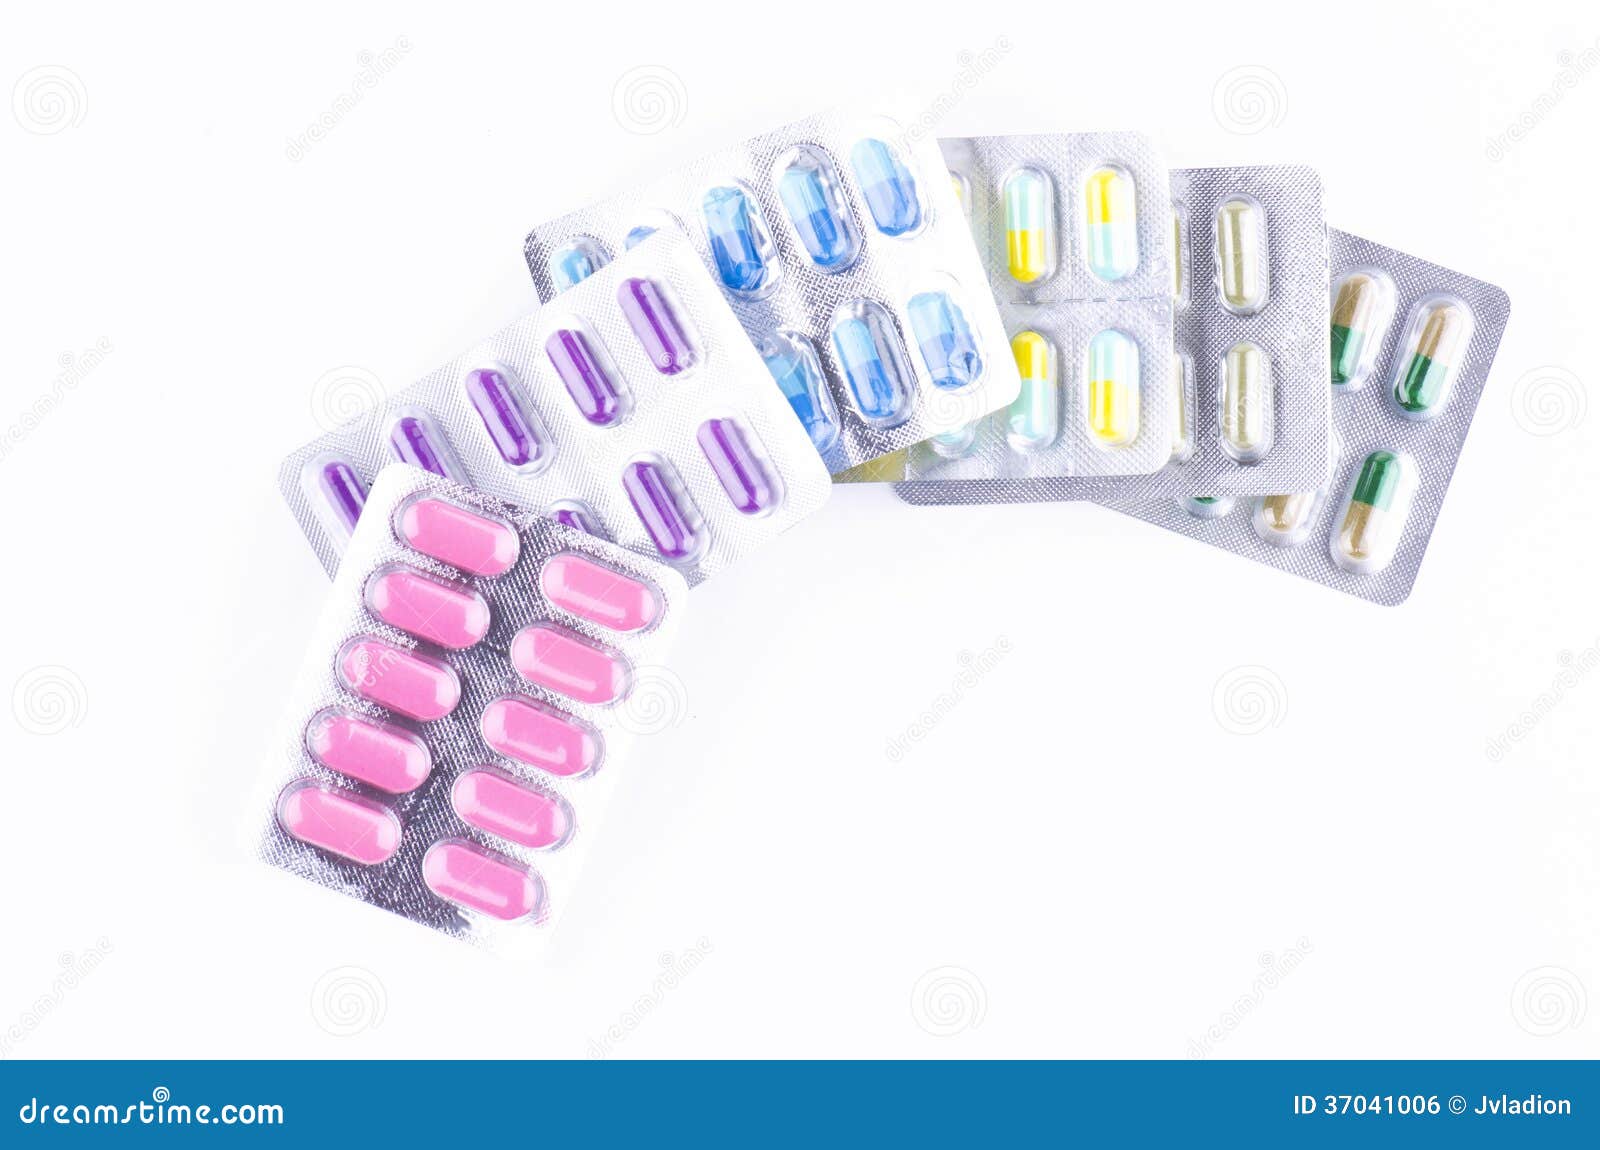 Blister Packs Of Blue And Pink Pills And Electronic Digital Thermometer